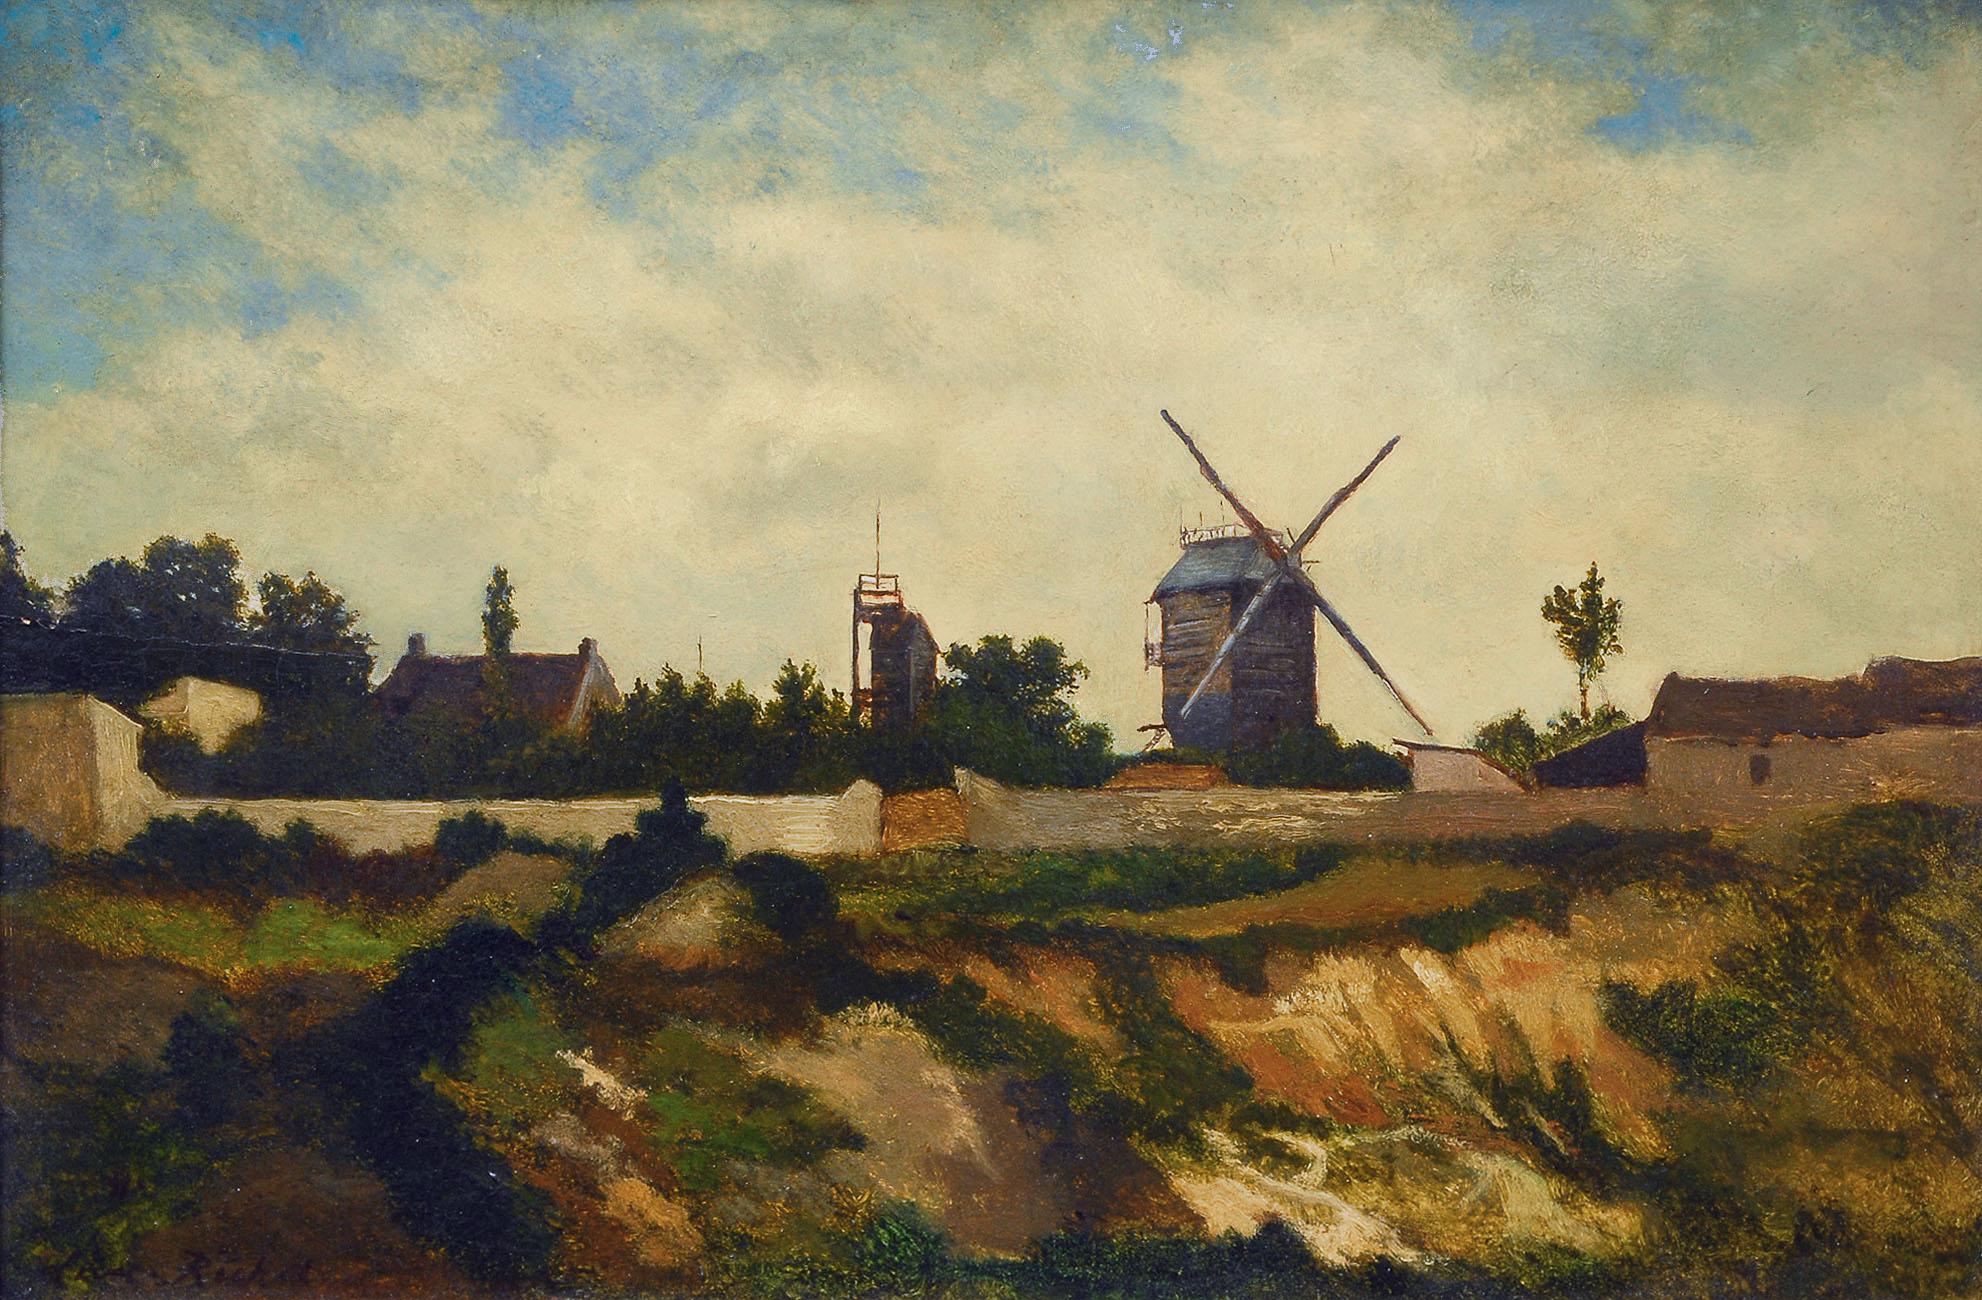 Landscape with windmill and houses